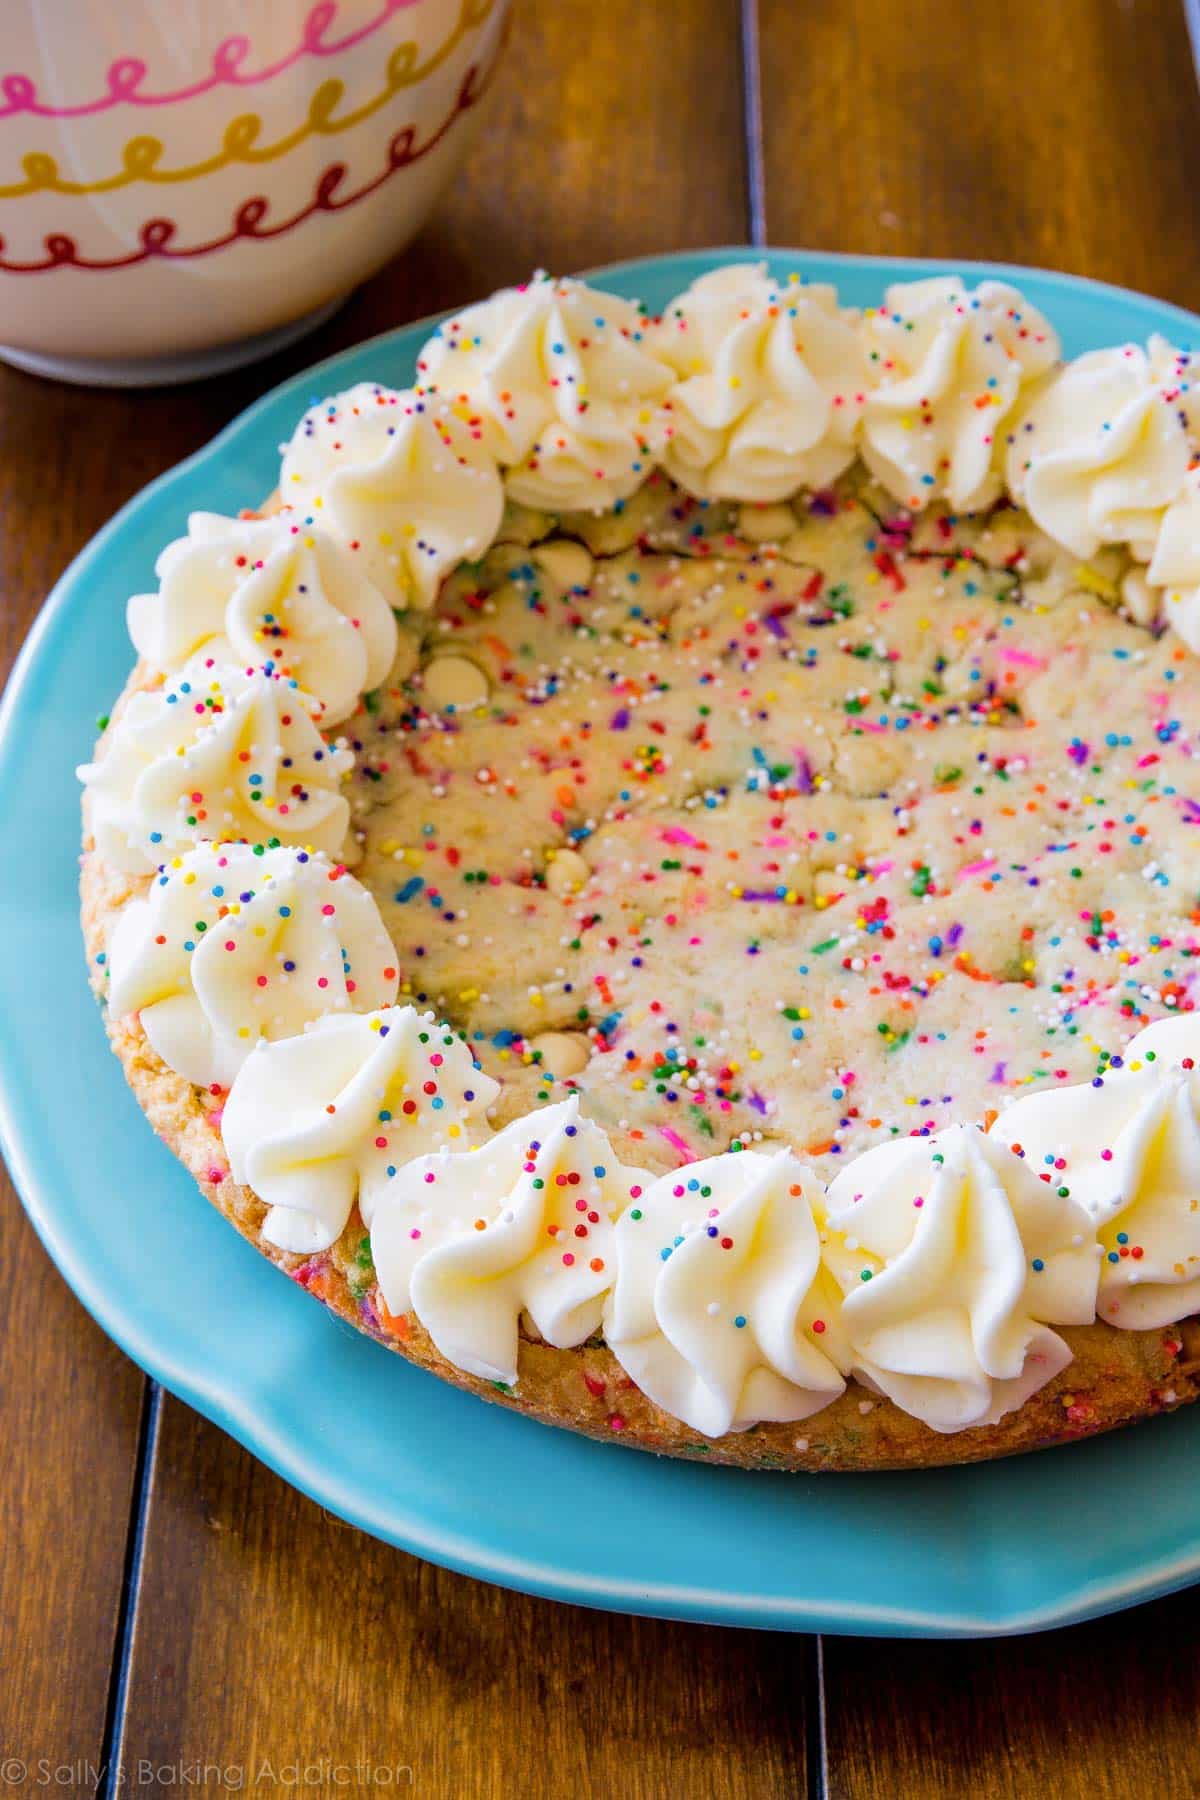 funfetti sugar cookie cake with piped frosting decorations and sprinkles on a blue plate